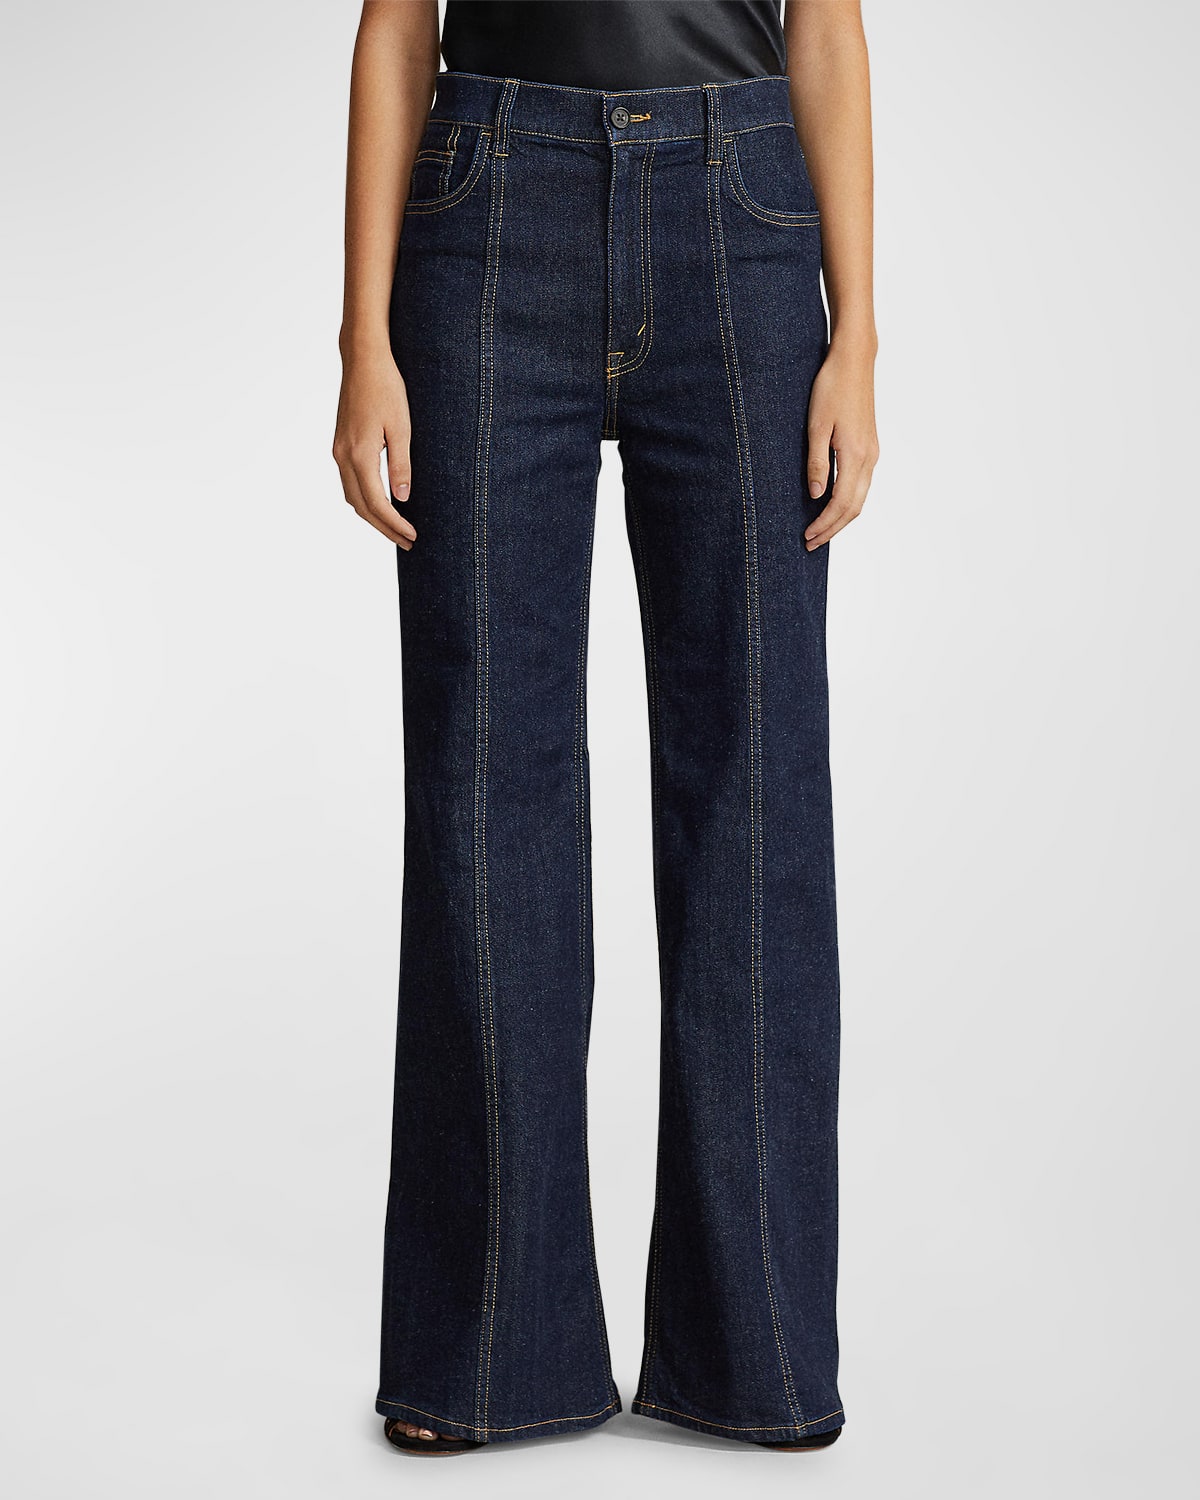 POLO RALPH LAUREN THE FLARE HIGH-RISE JEANS